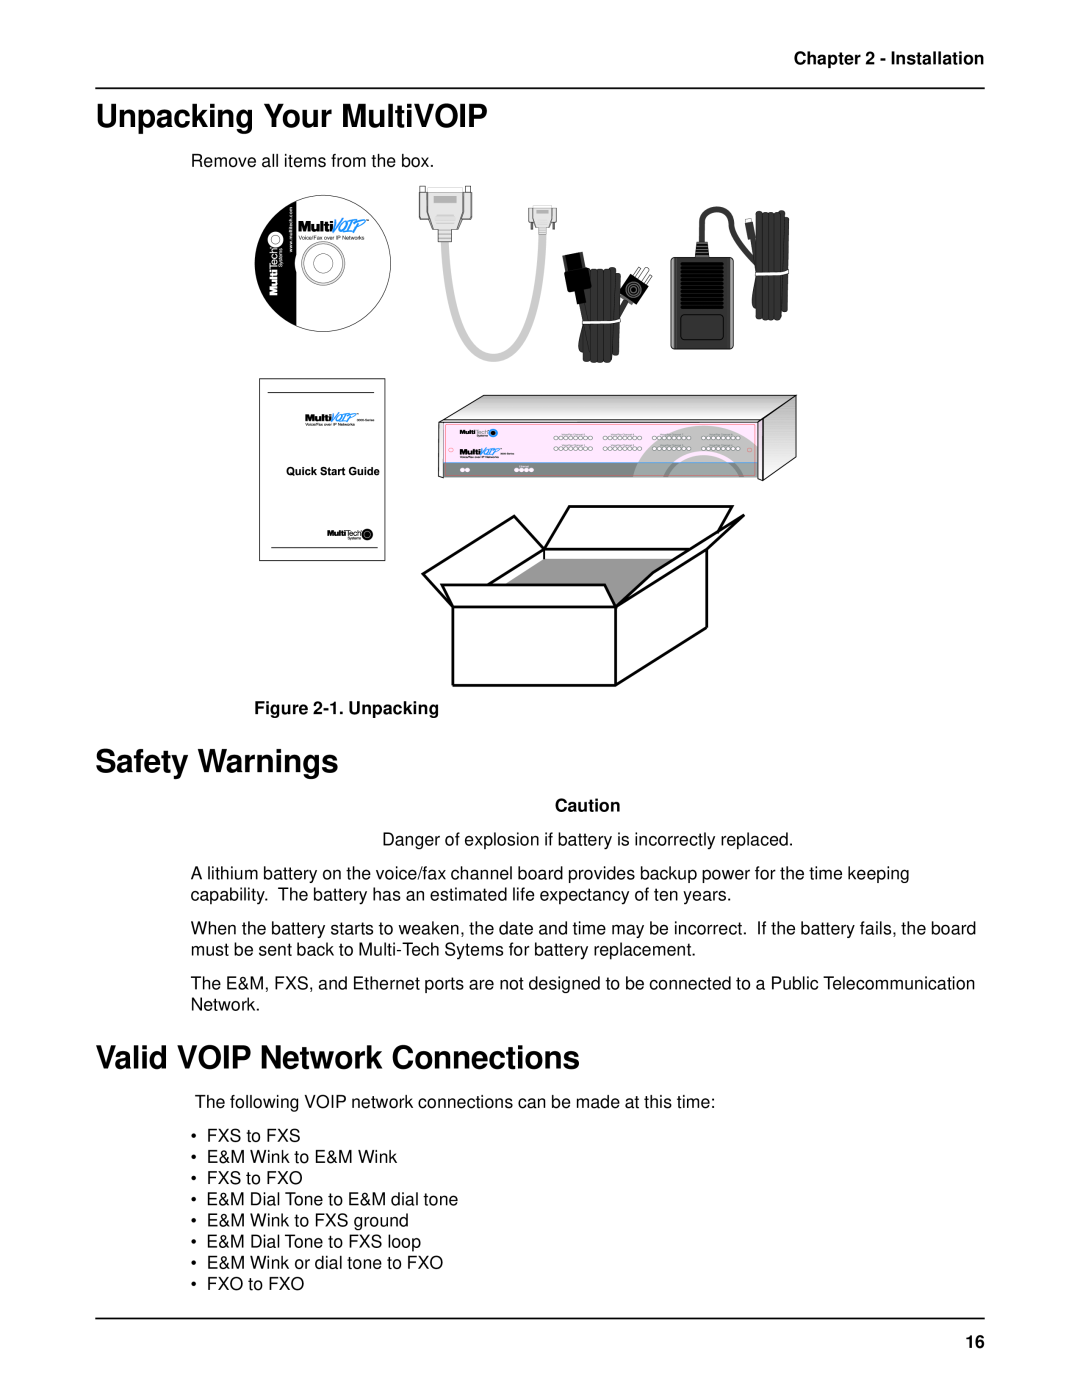 Multi-Tech Systems MVP 800 manual Unpacking Your MultiVOIP, Safety Warnings, Valid VOIP Network Connections, 1. Unpacking 